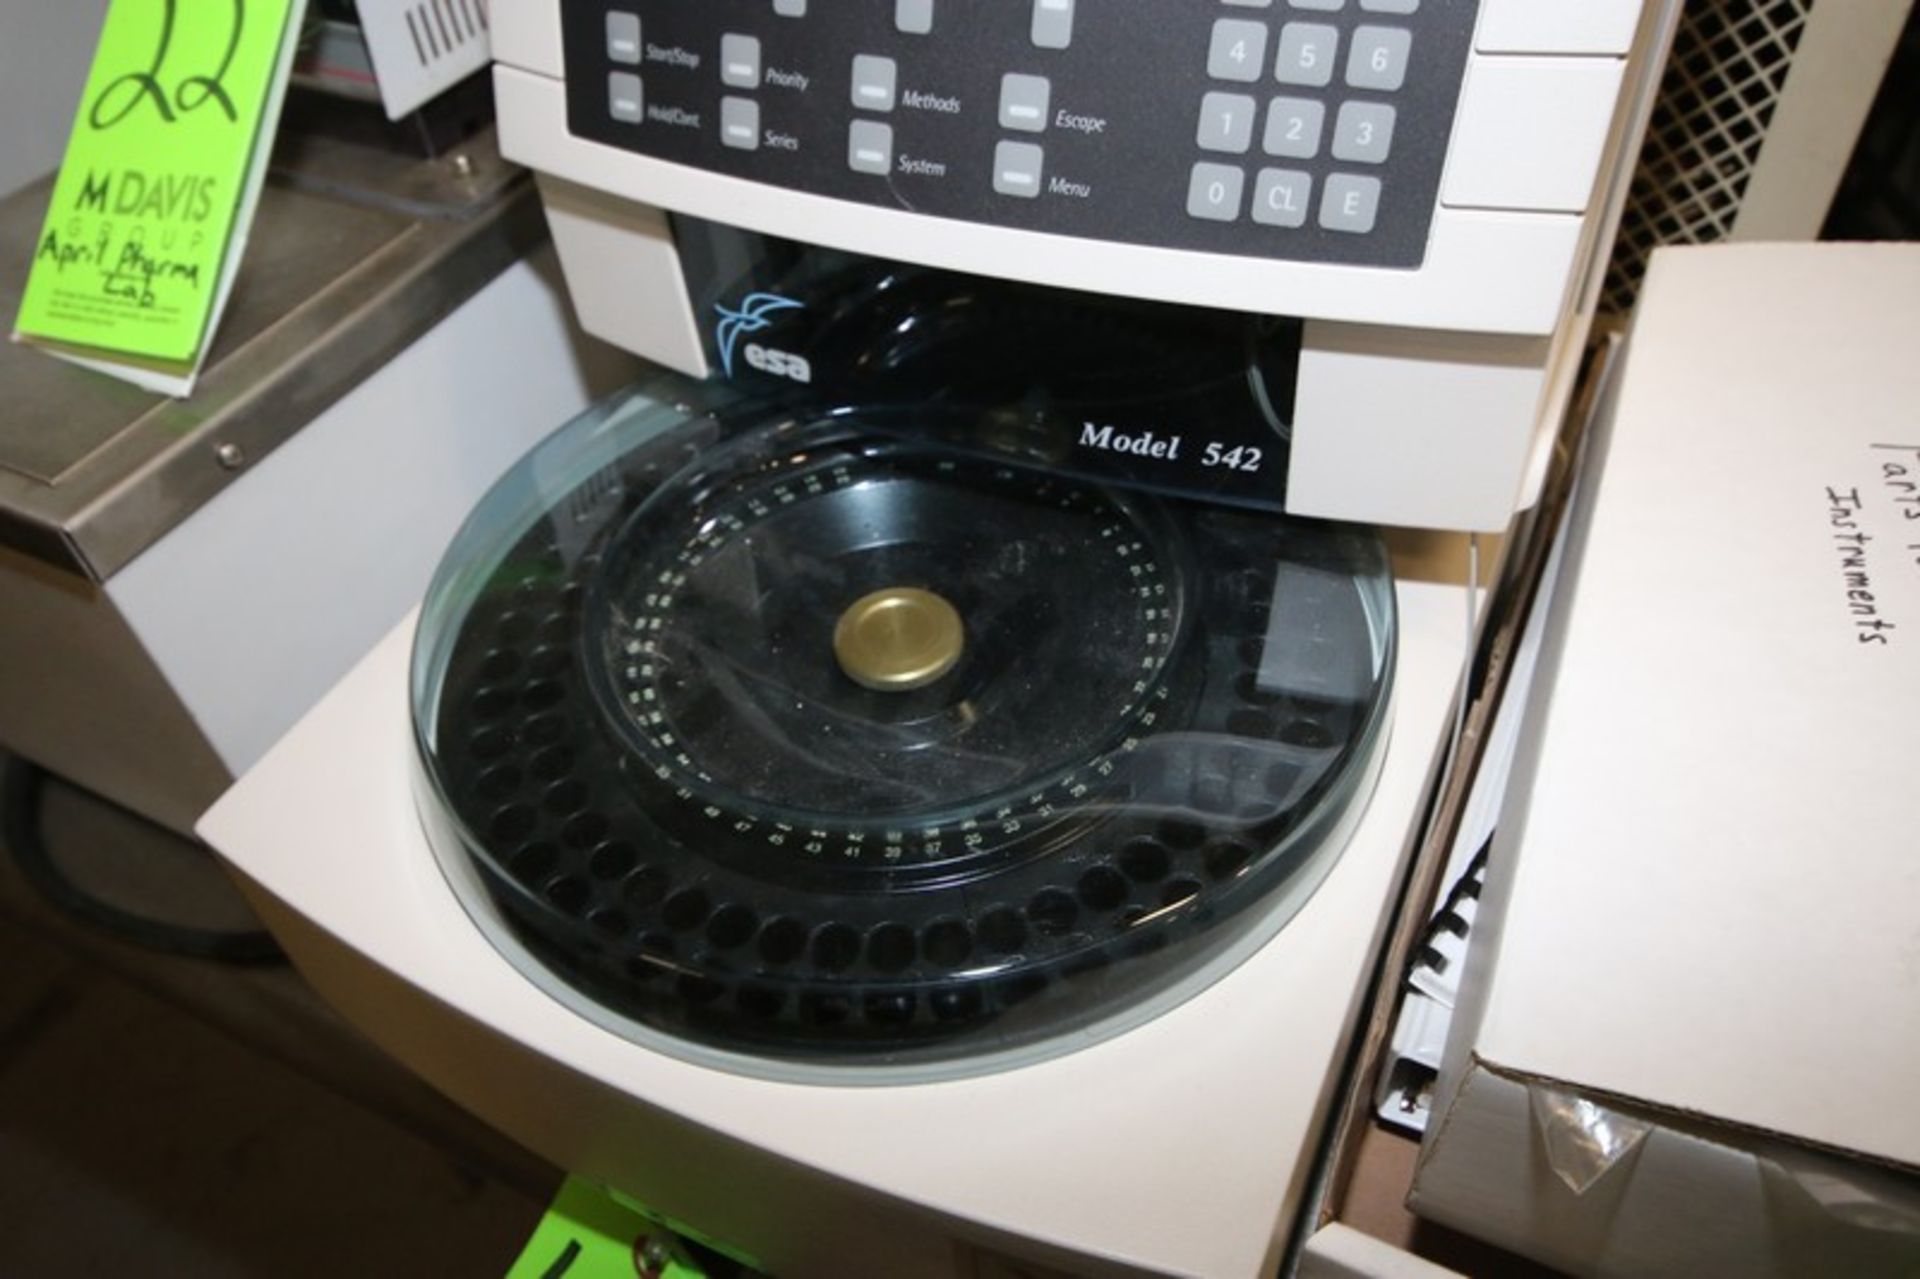 ESA Autosampler, Model 542, SN 70529, 230 / 115 V, Includes Supplies & Manuals - Image 3 of 4